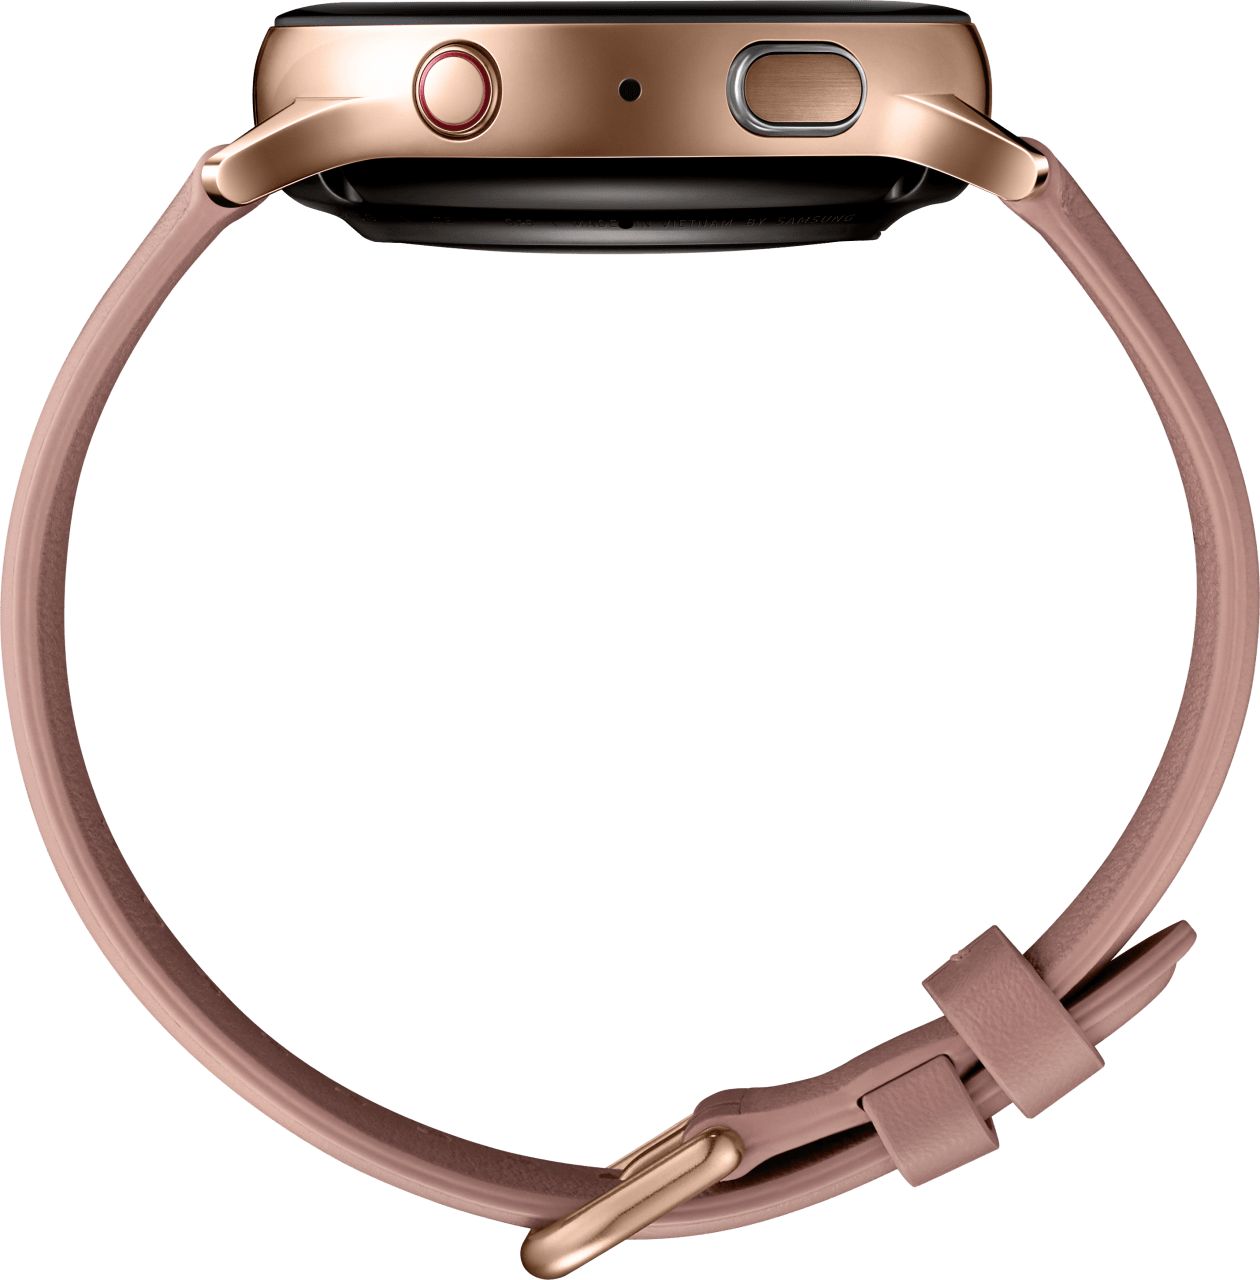 Gold Samsung Galaxy Watch Active2 (LTE), 40mm Stainless steel case, Leather band.4